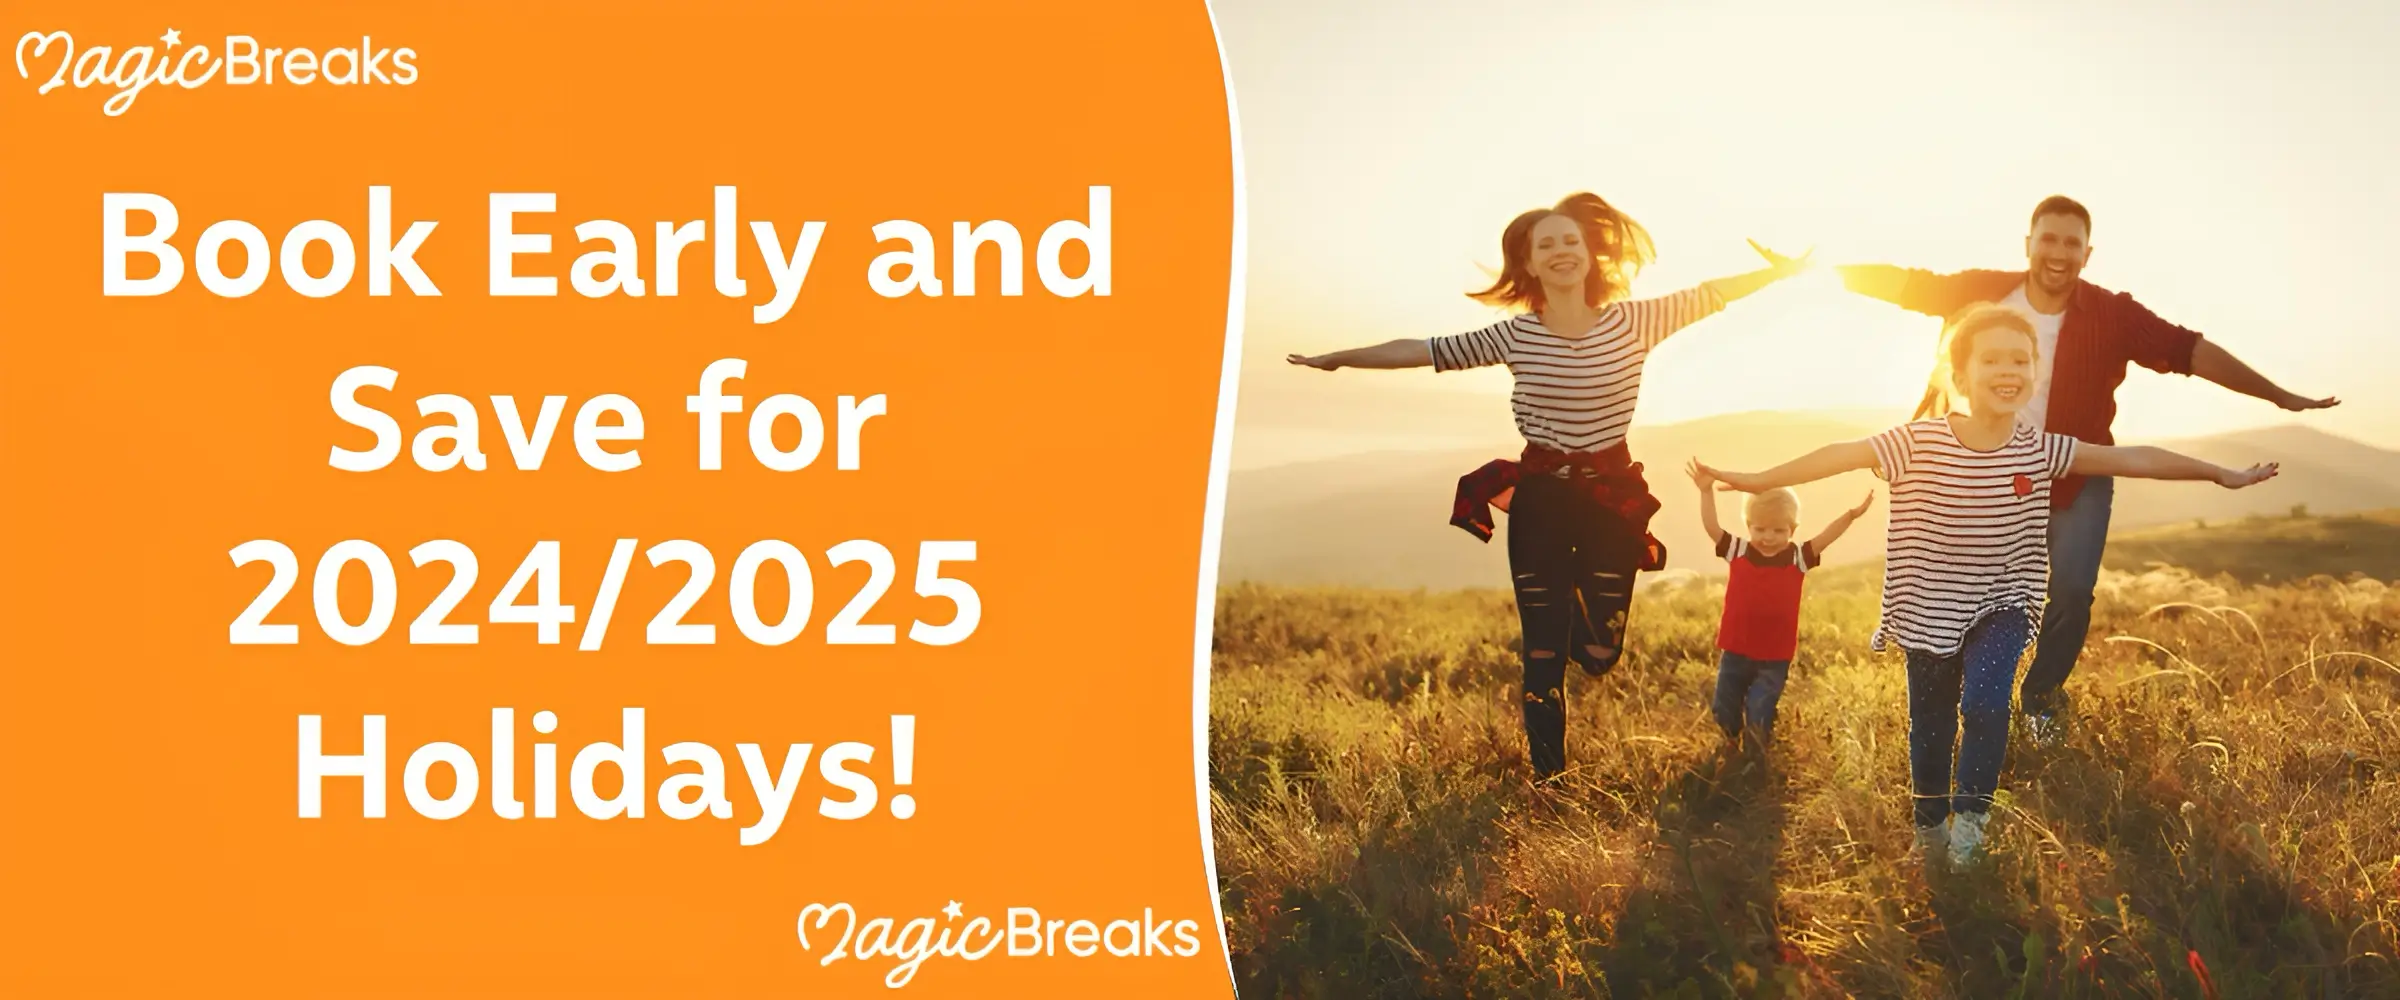 MagicBreaks Book Early and Save for 2024/2025 Holidays! carousel banner